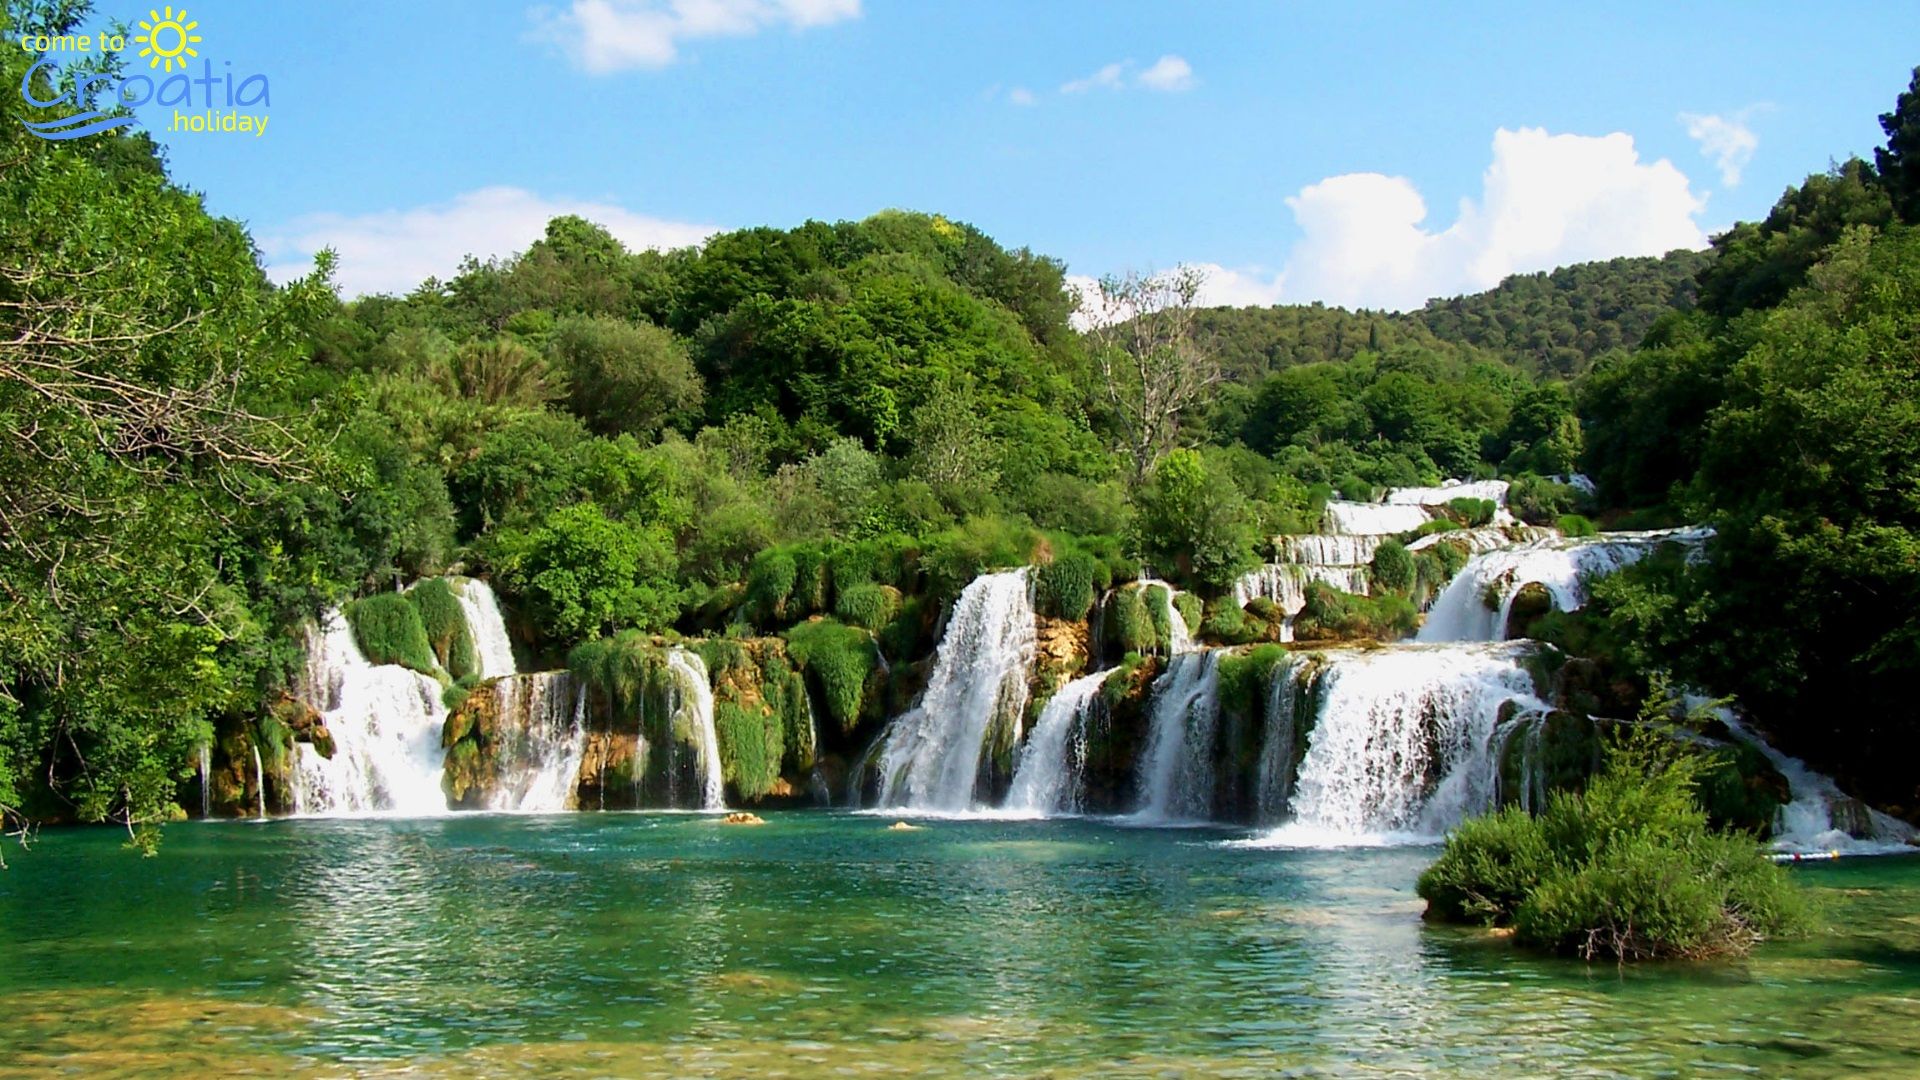 KRKA Green Oasis In the Very Middle Of the Stone Land